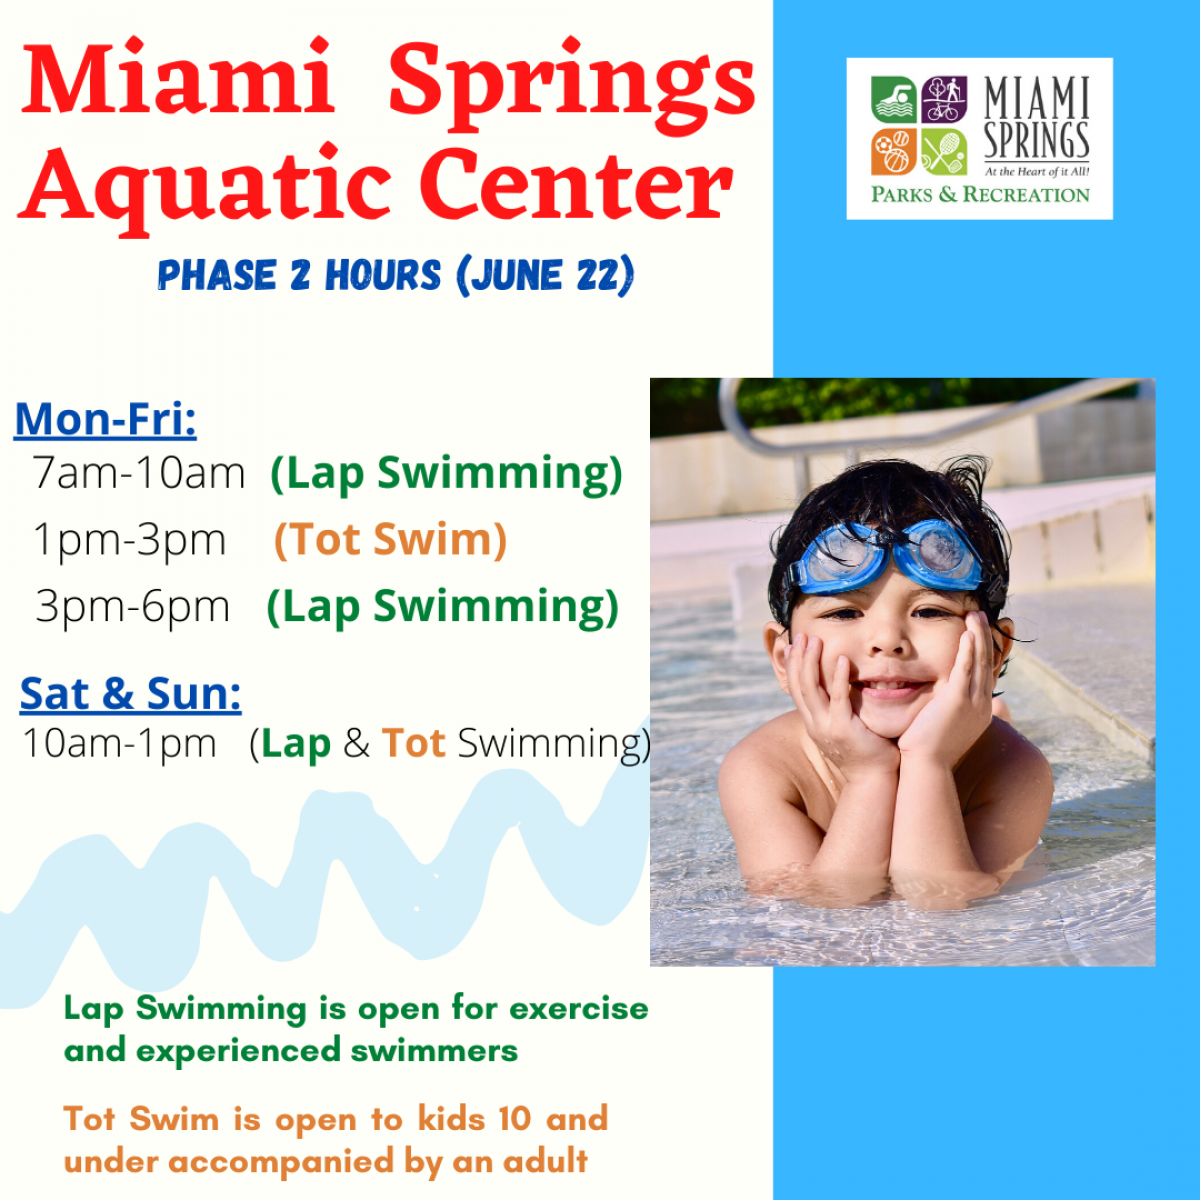 Miami Springs Aquatic Center Phase 2 of Reopening on June 22, 2020